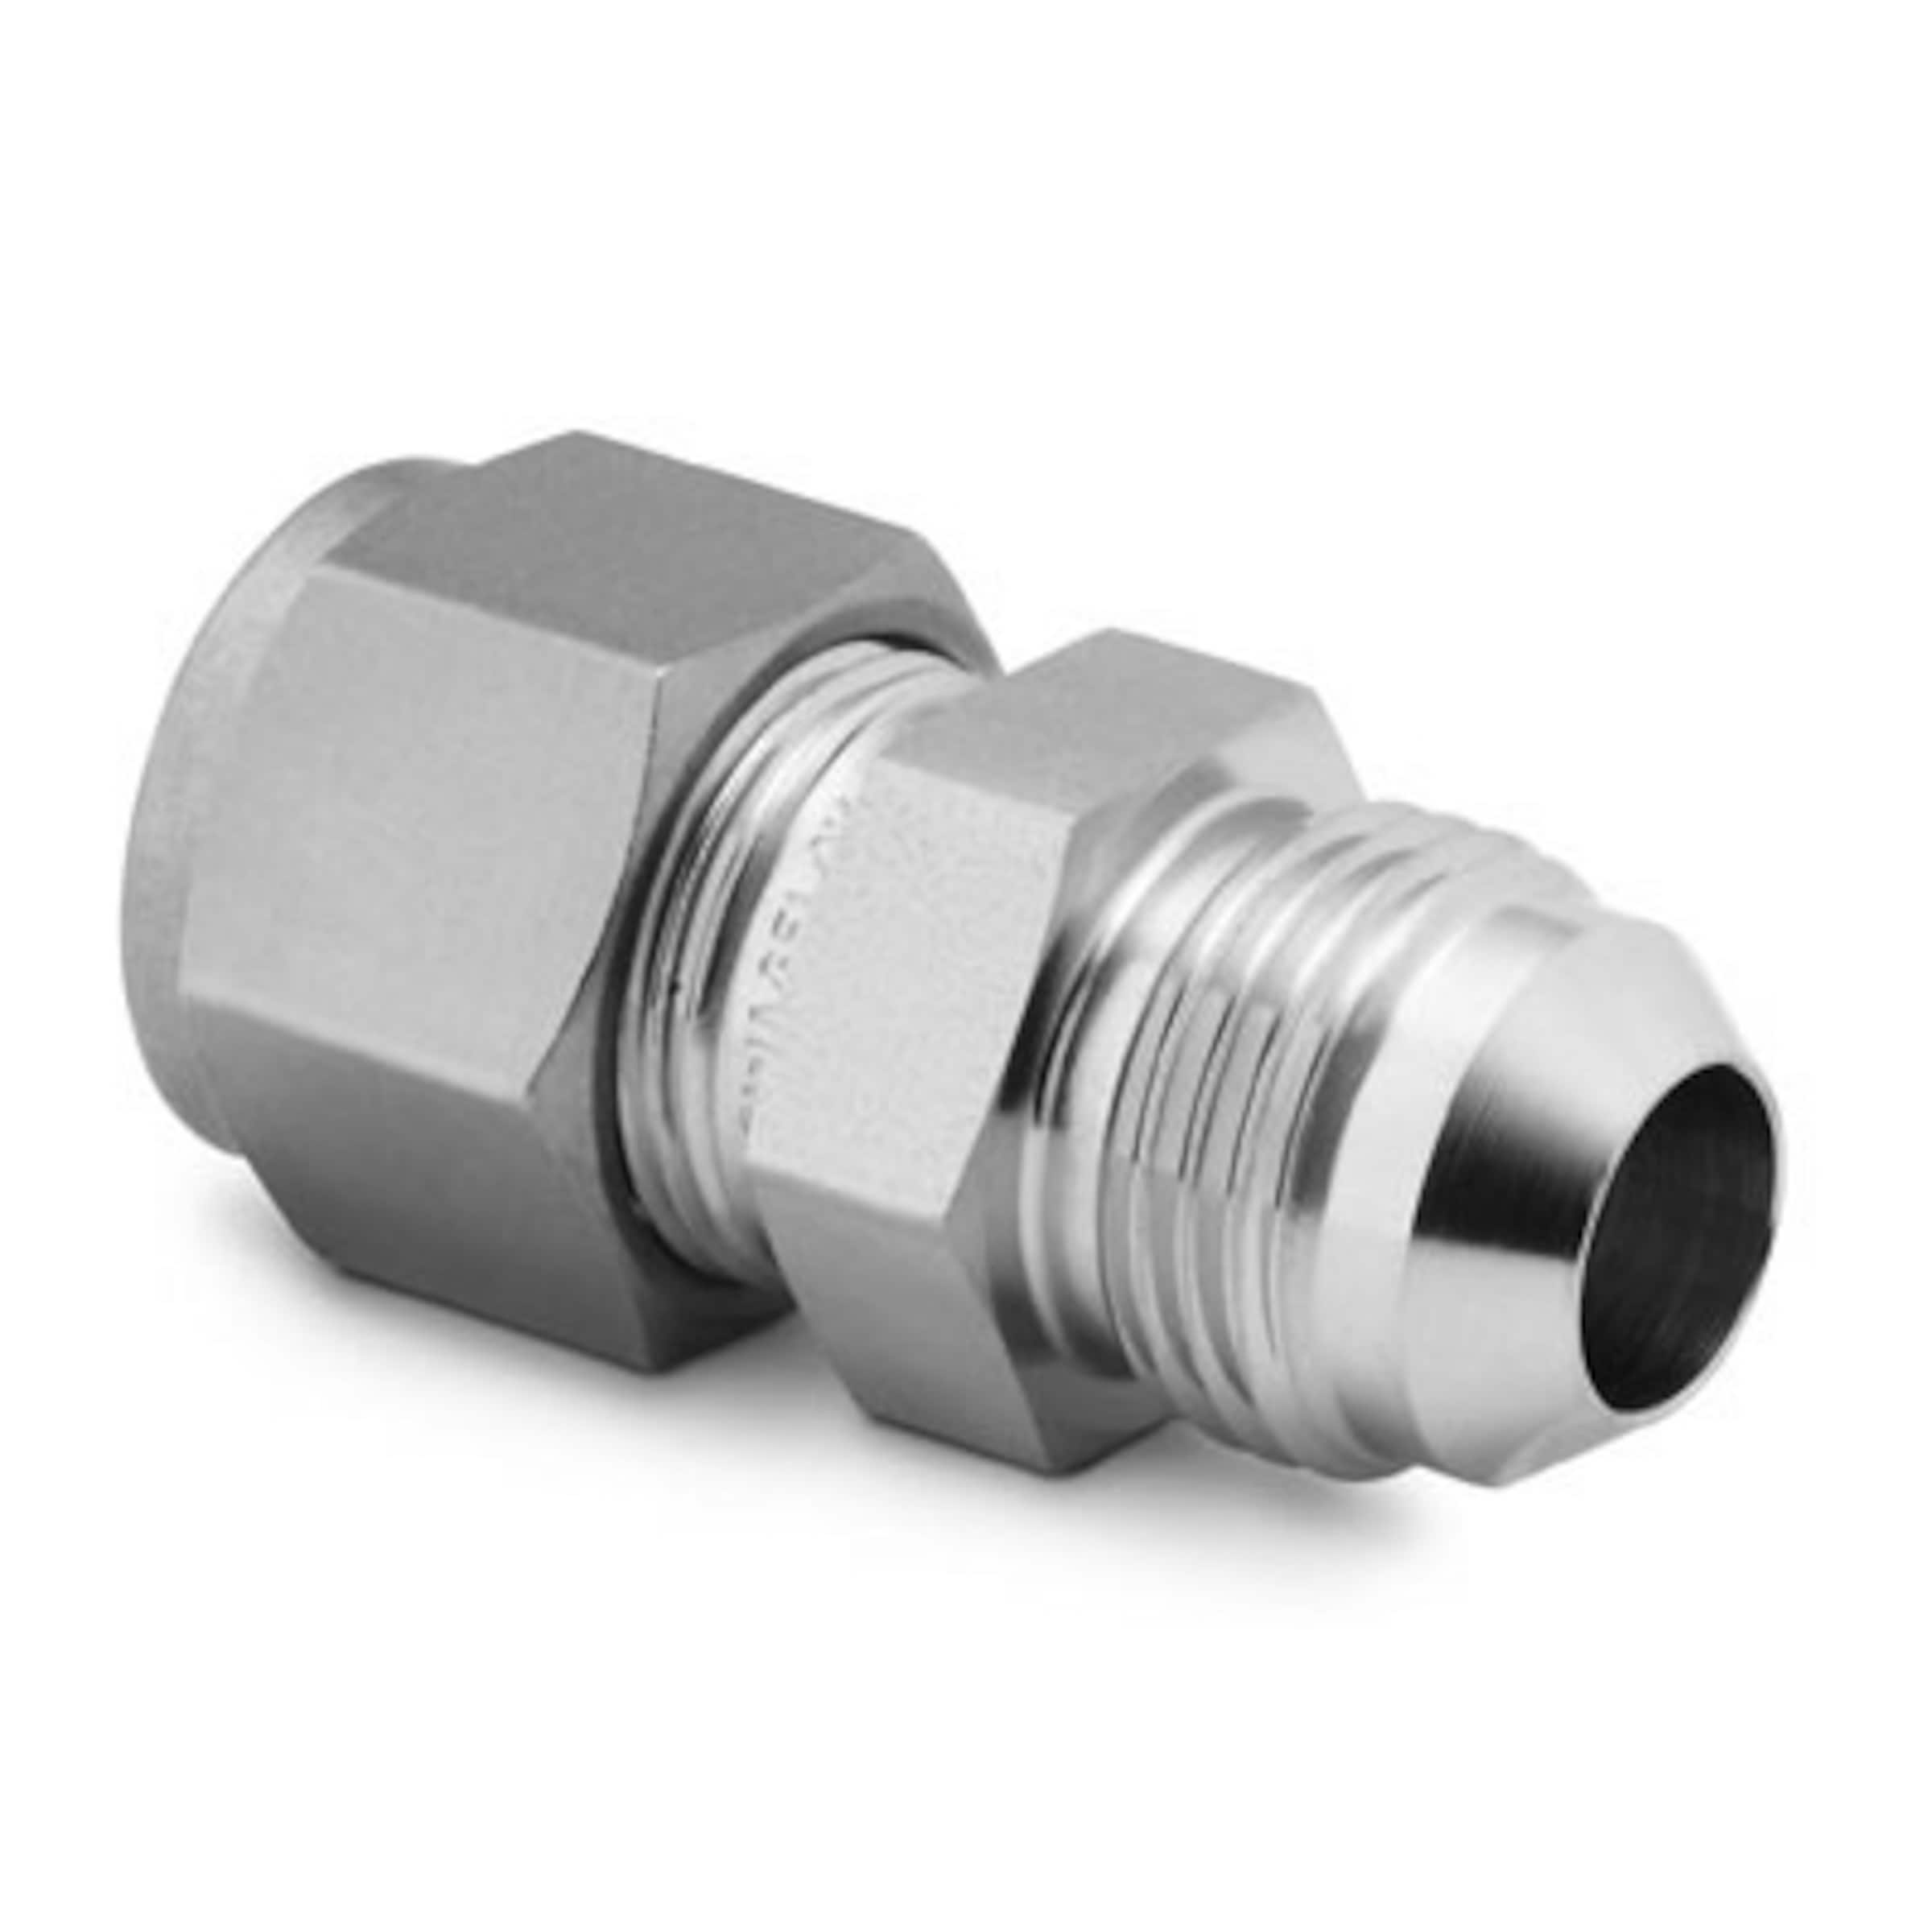 Stainless Steel Swagelok Tube Fitting, Union, 1/2 in. Tube OD, Unions, Tube Fittings and Adapters, Fittings, All Products